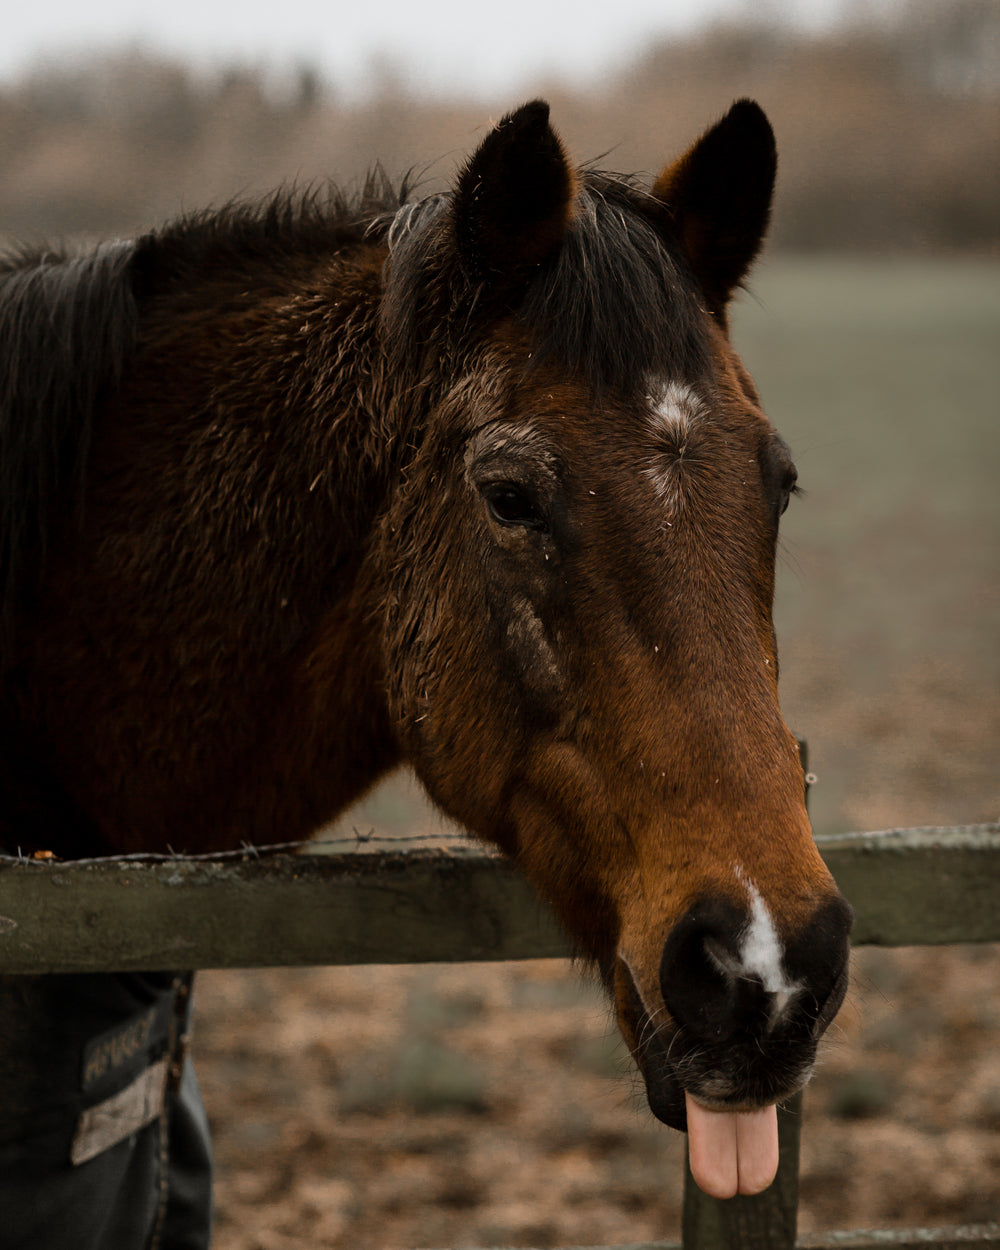 a horse with their tongue out by a wooden fence